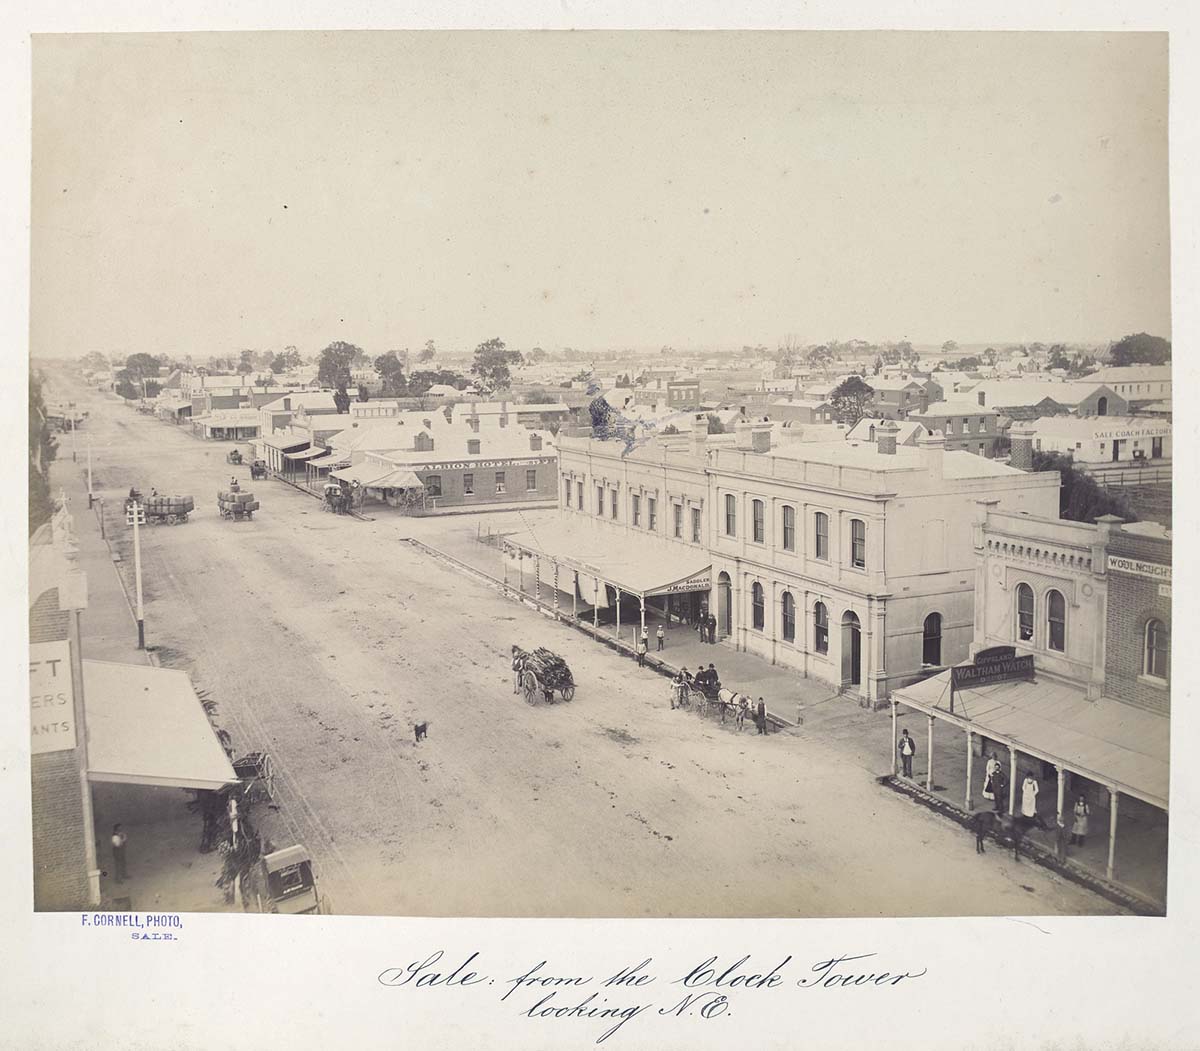 Sale. View to town from the Clock Tower, looking North East, between 1866 and 1885